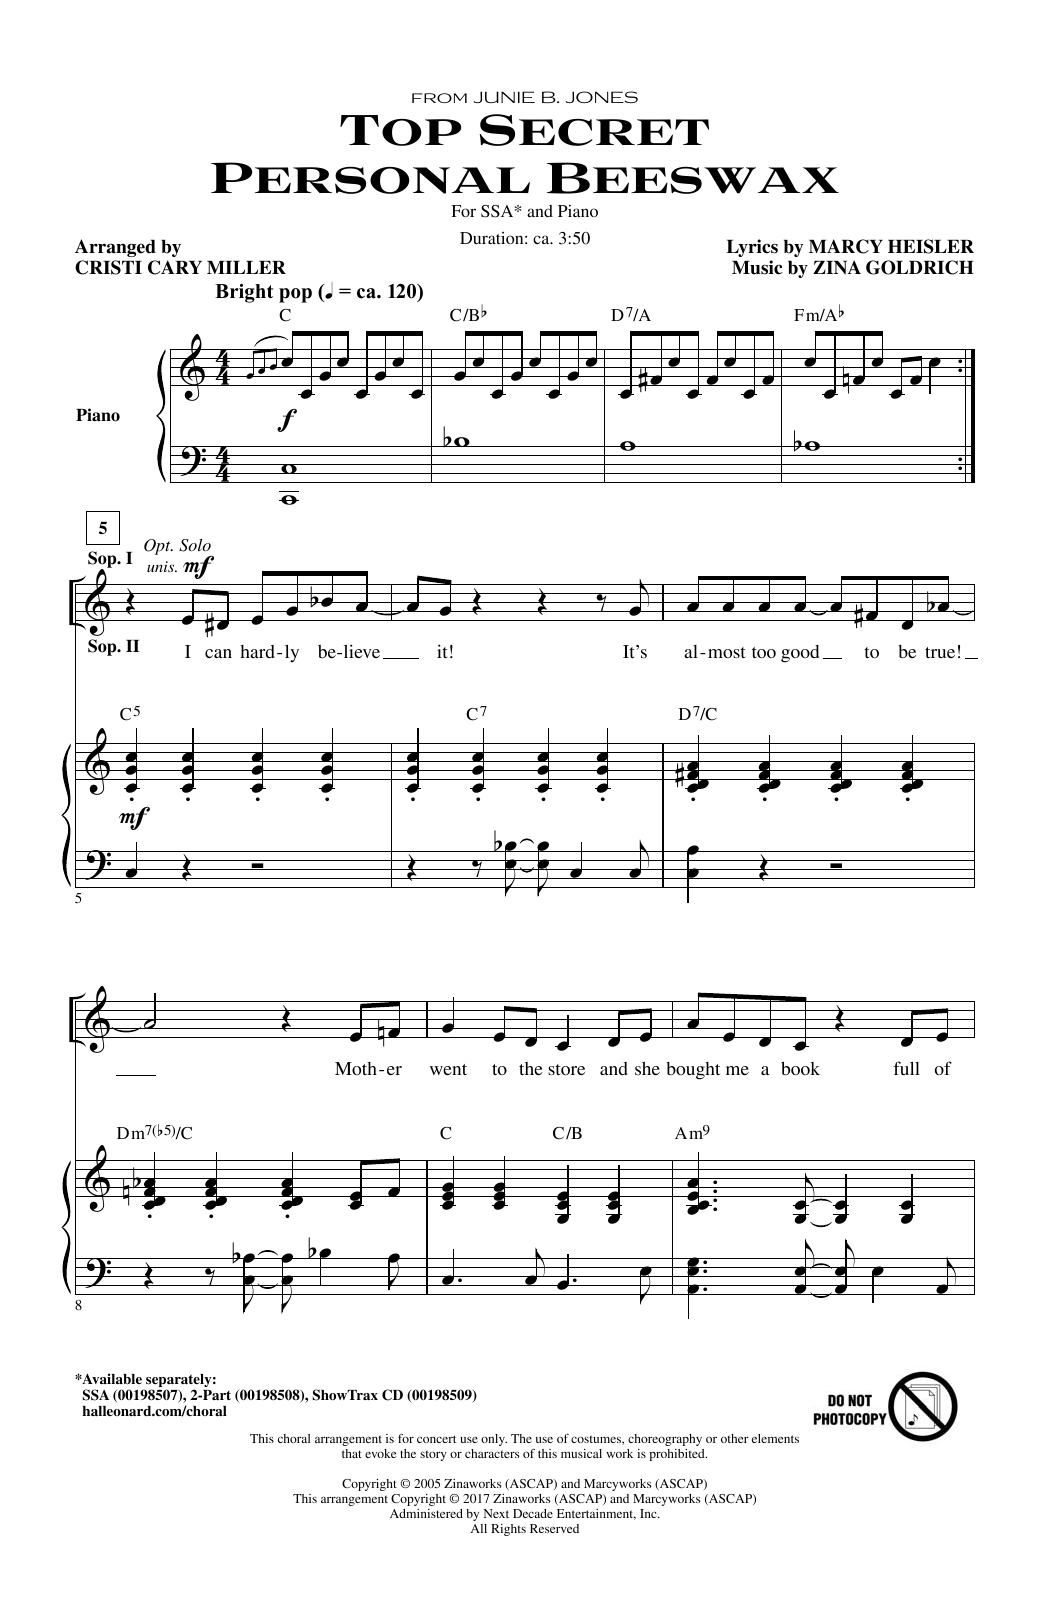 Download Cristi Cary Miller Top Secret Personal Beeswax Sheet Music